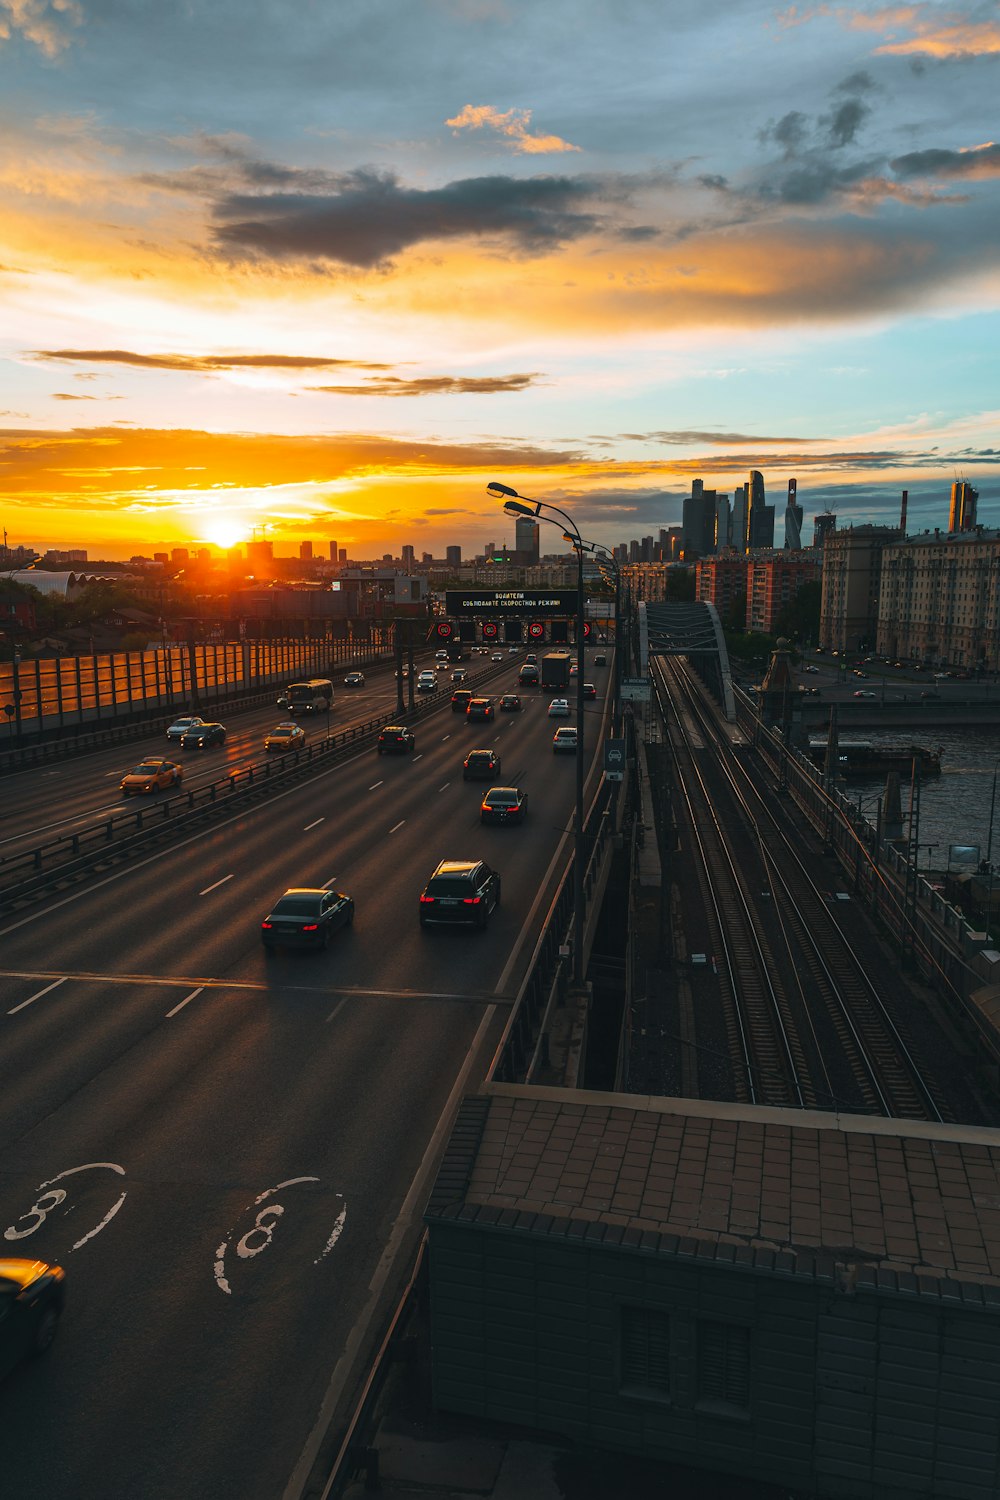 a sunset view of a highway with cars driving on it